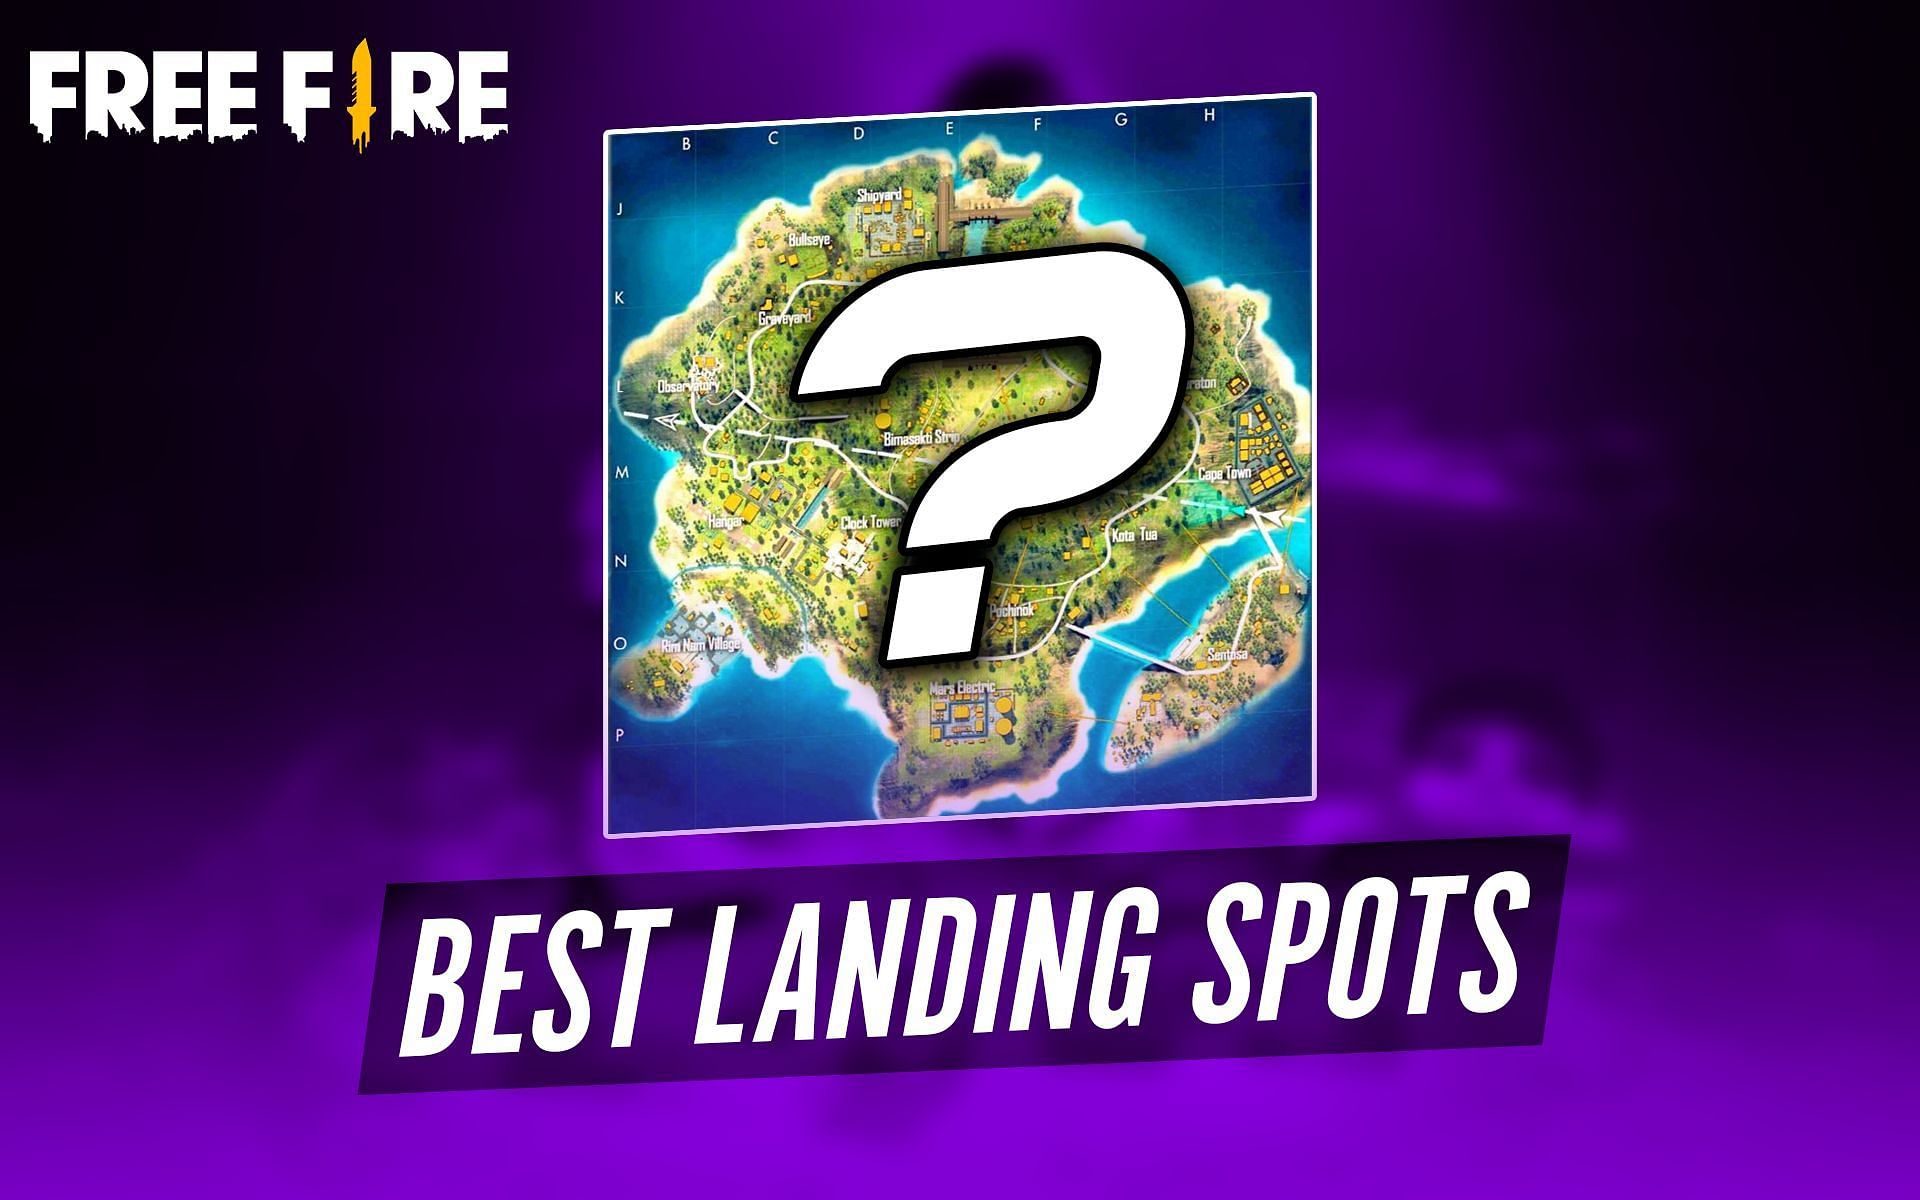 Landing spots can play a crucial role in finding loot (Image via Sportskeeda)